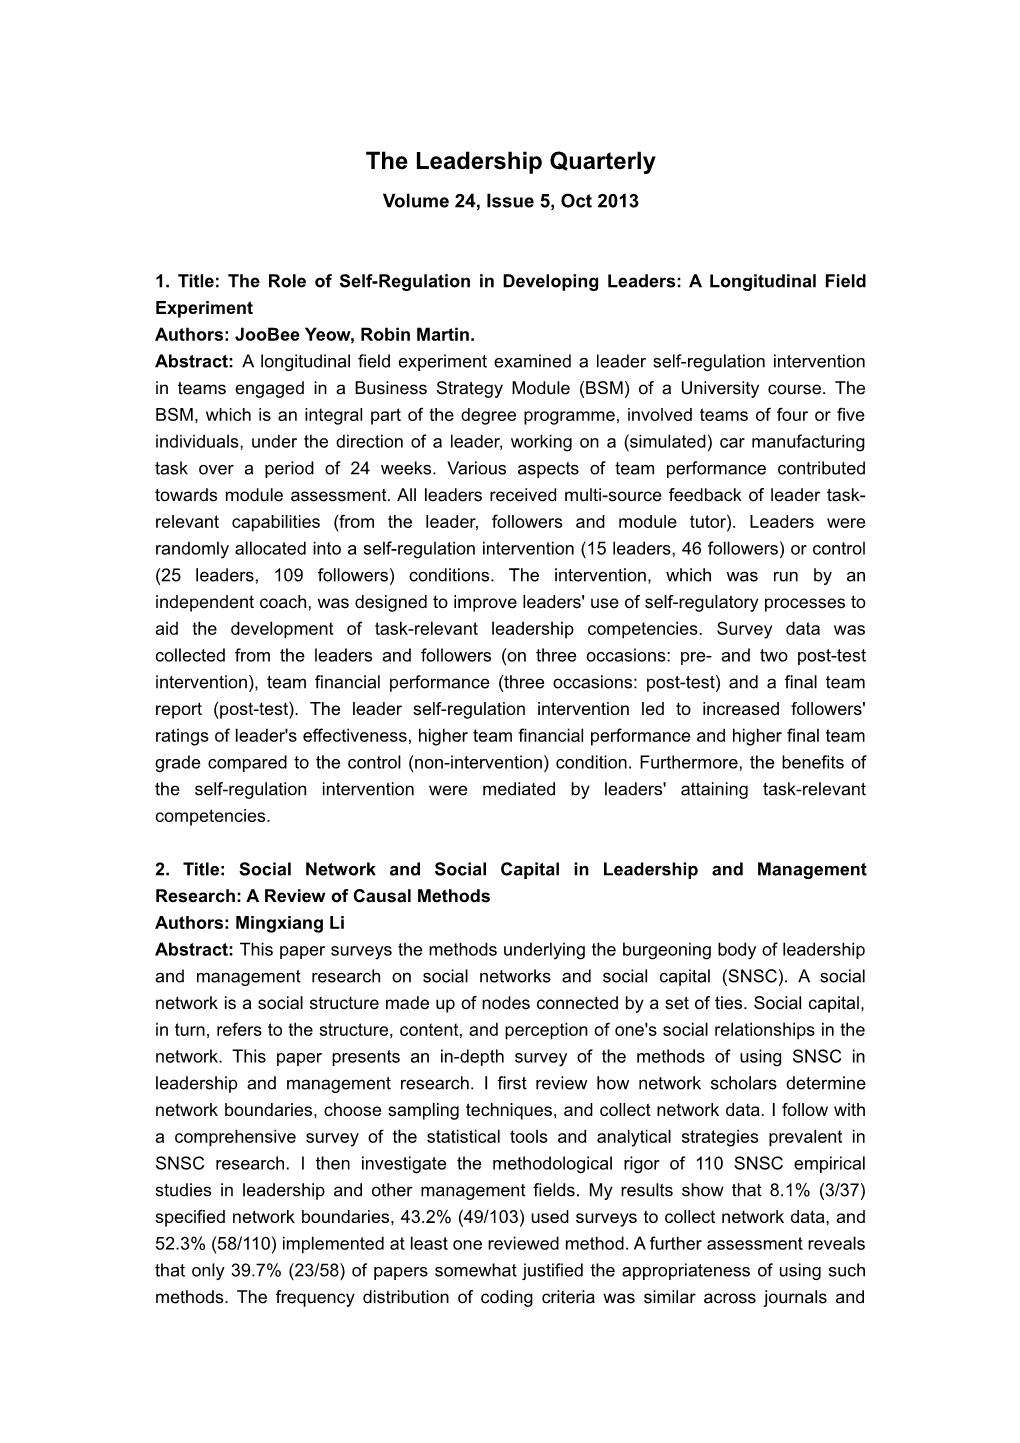 1. Title: the Role of Self-Regulation in Developing Leaders: a Longitudinal Field Experiment